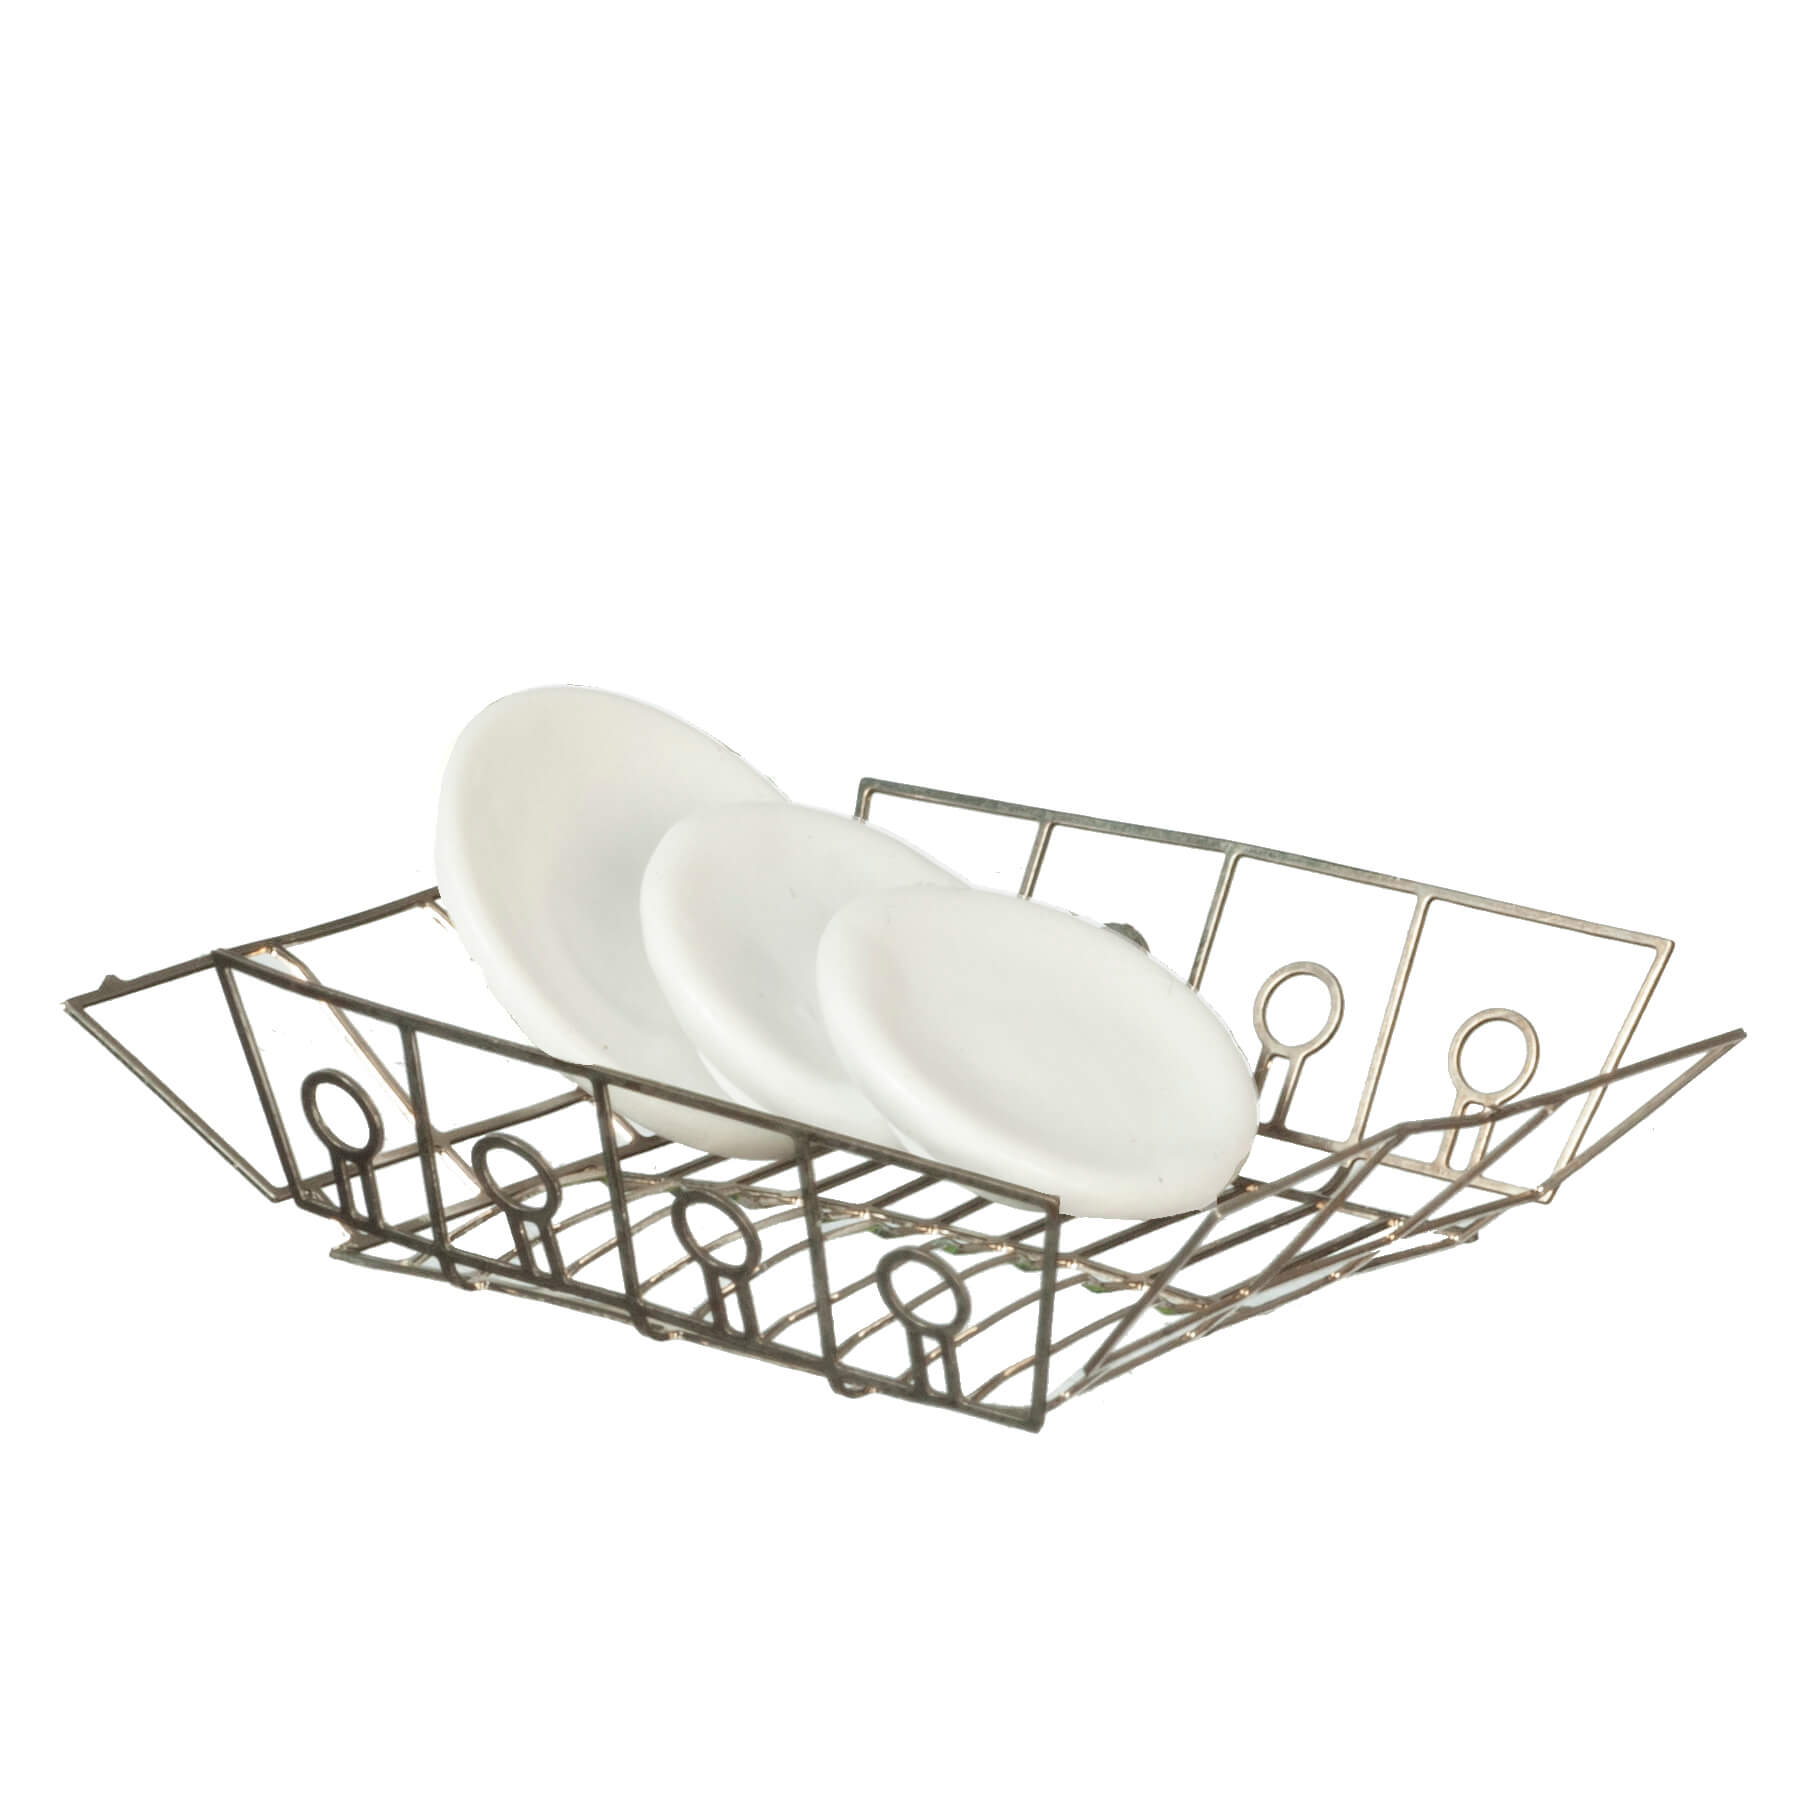 Dish Strainer Rack w/ Dishes - Silver